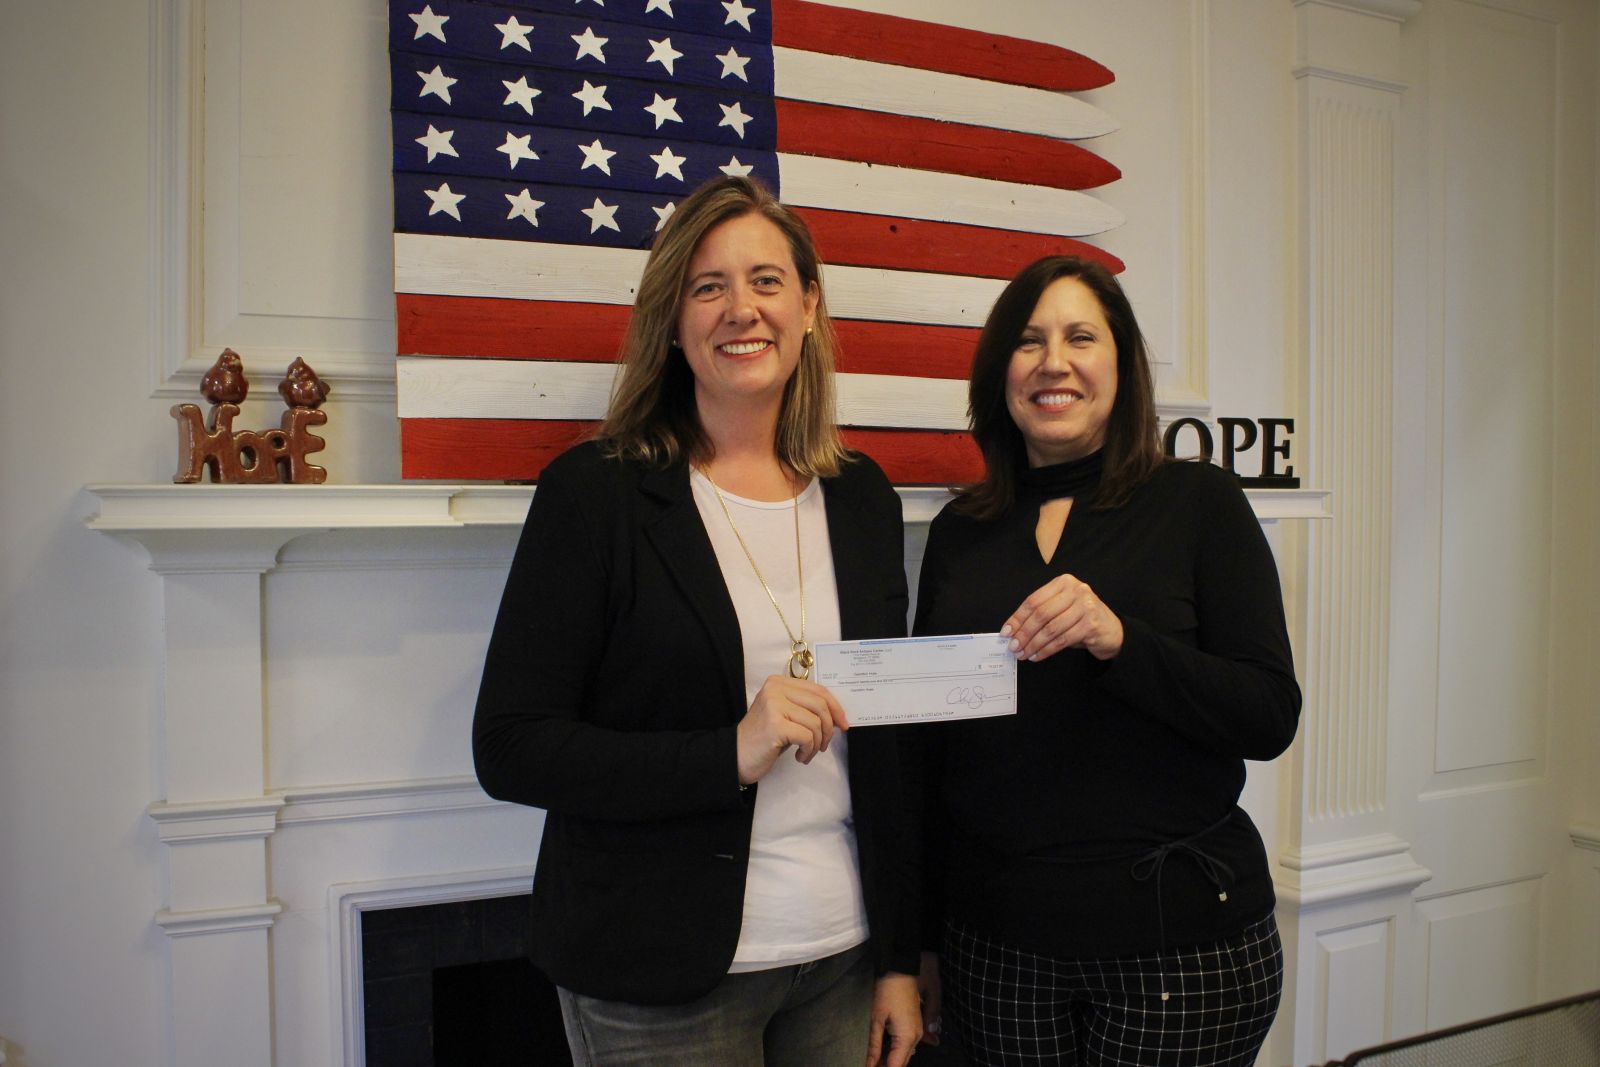 Christie Spooner (left), managing partner of BRG presents Carla Miklos (right), executive director of Operation Hope of Fairfield with a check for over $5,000 which includes the $4,300 colllected on the sale of the vase.